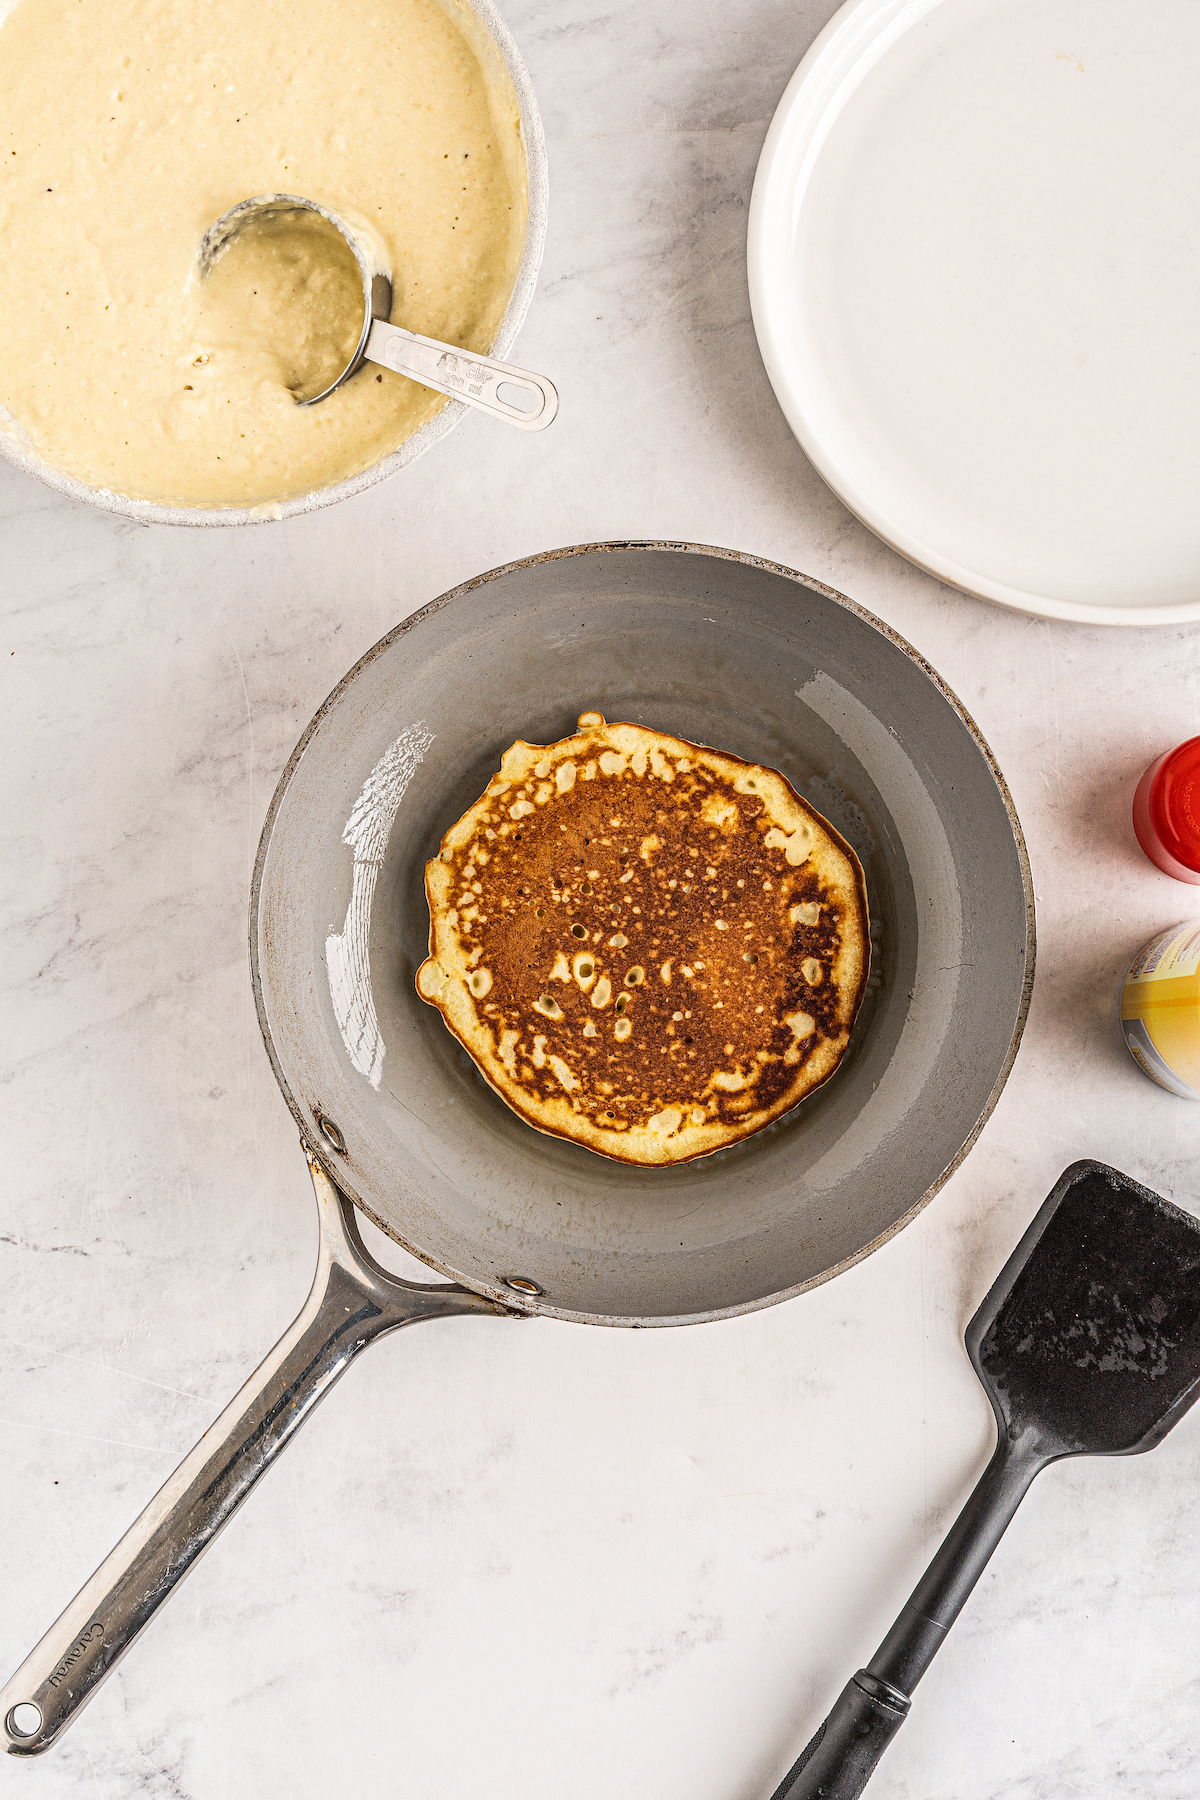 A pancake cooking in a skillet.